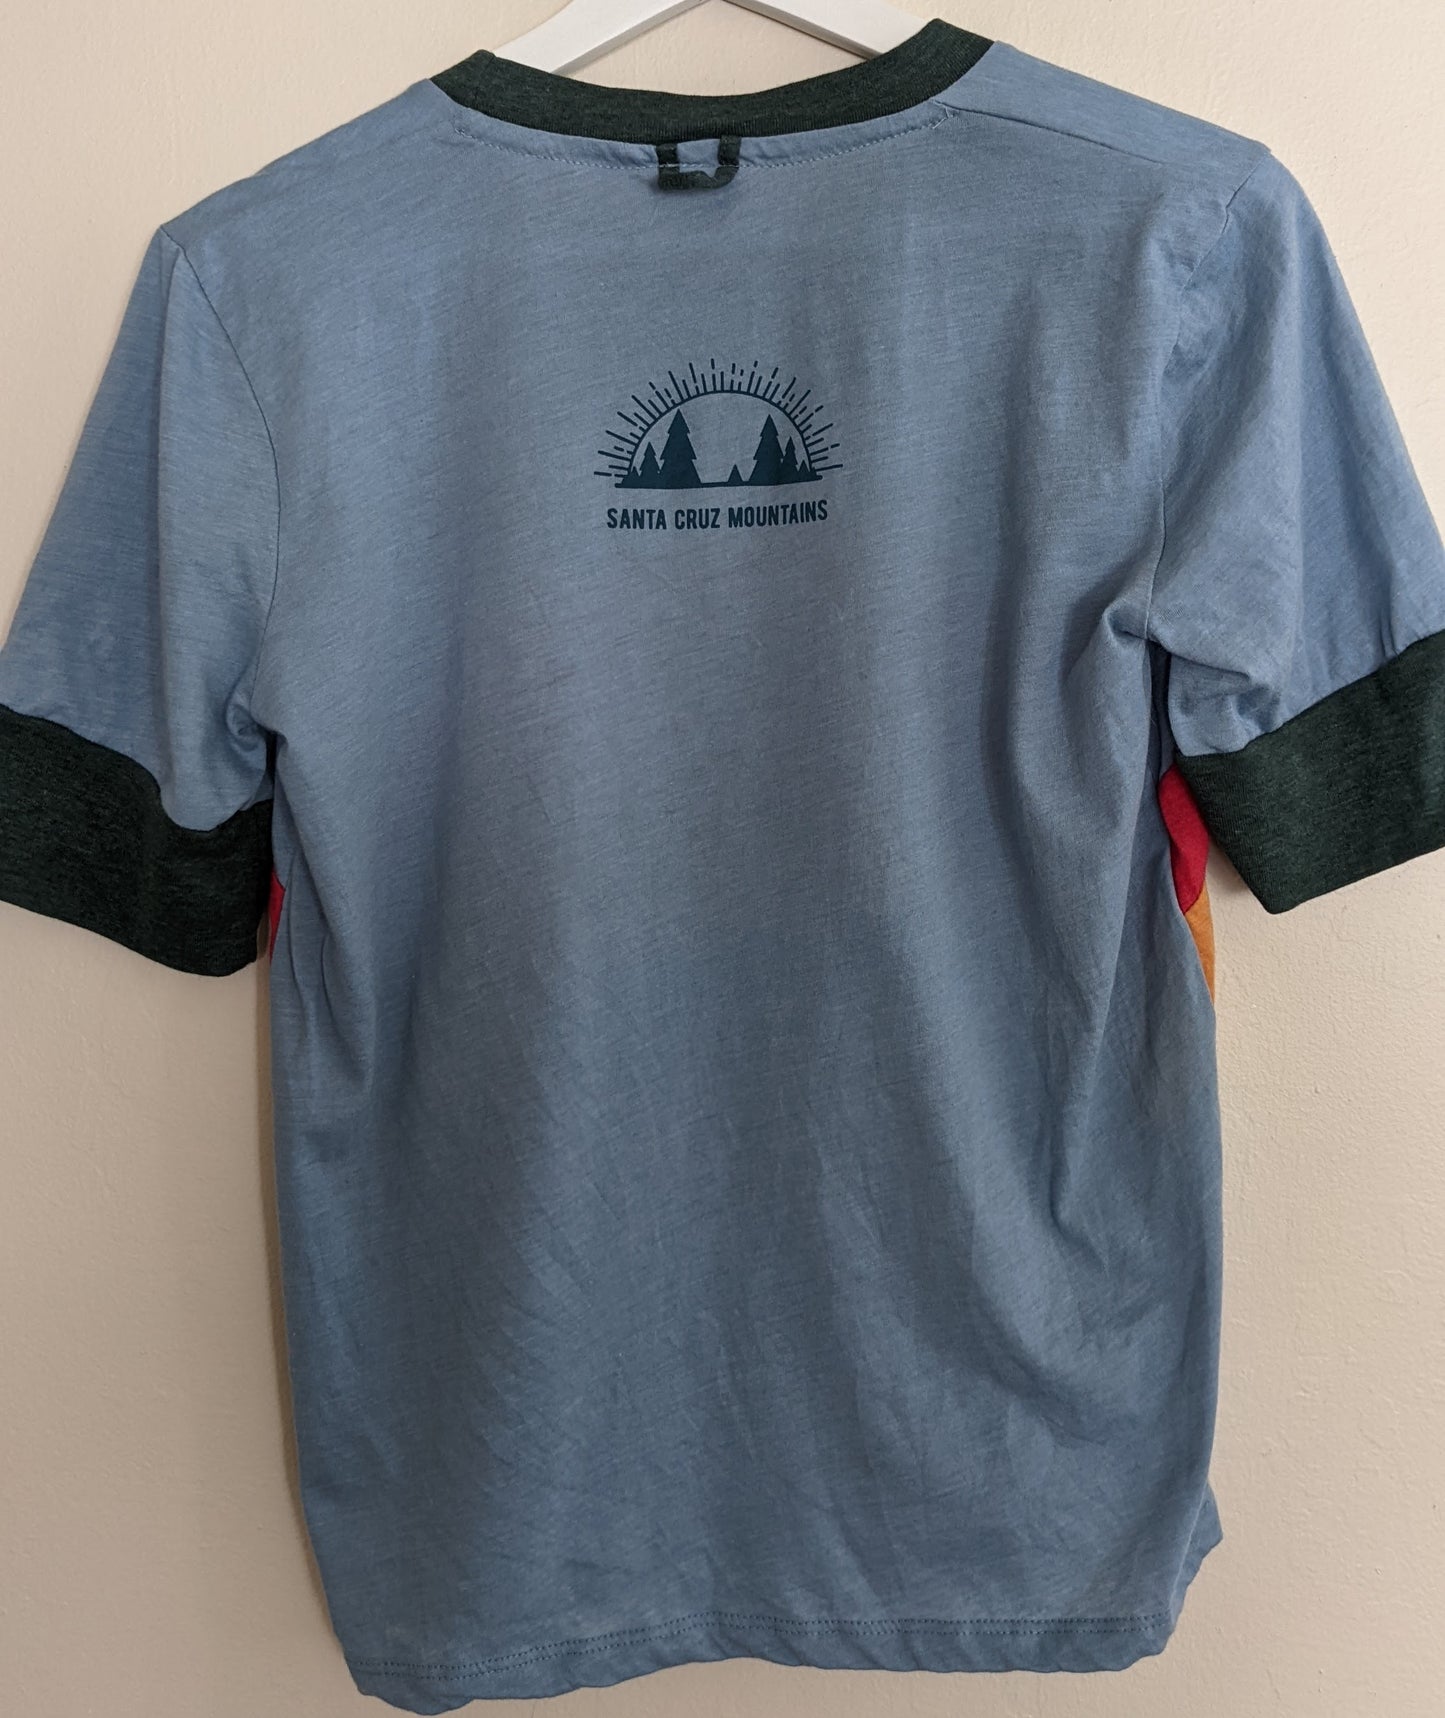 Blue and green shirt by Camp Collection with Santa Cruz Mountains Present logo mark design on back,  created by Jackie from Present